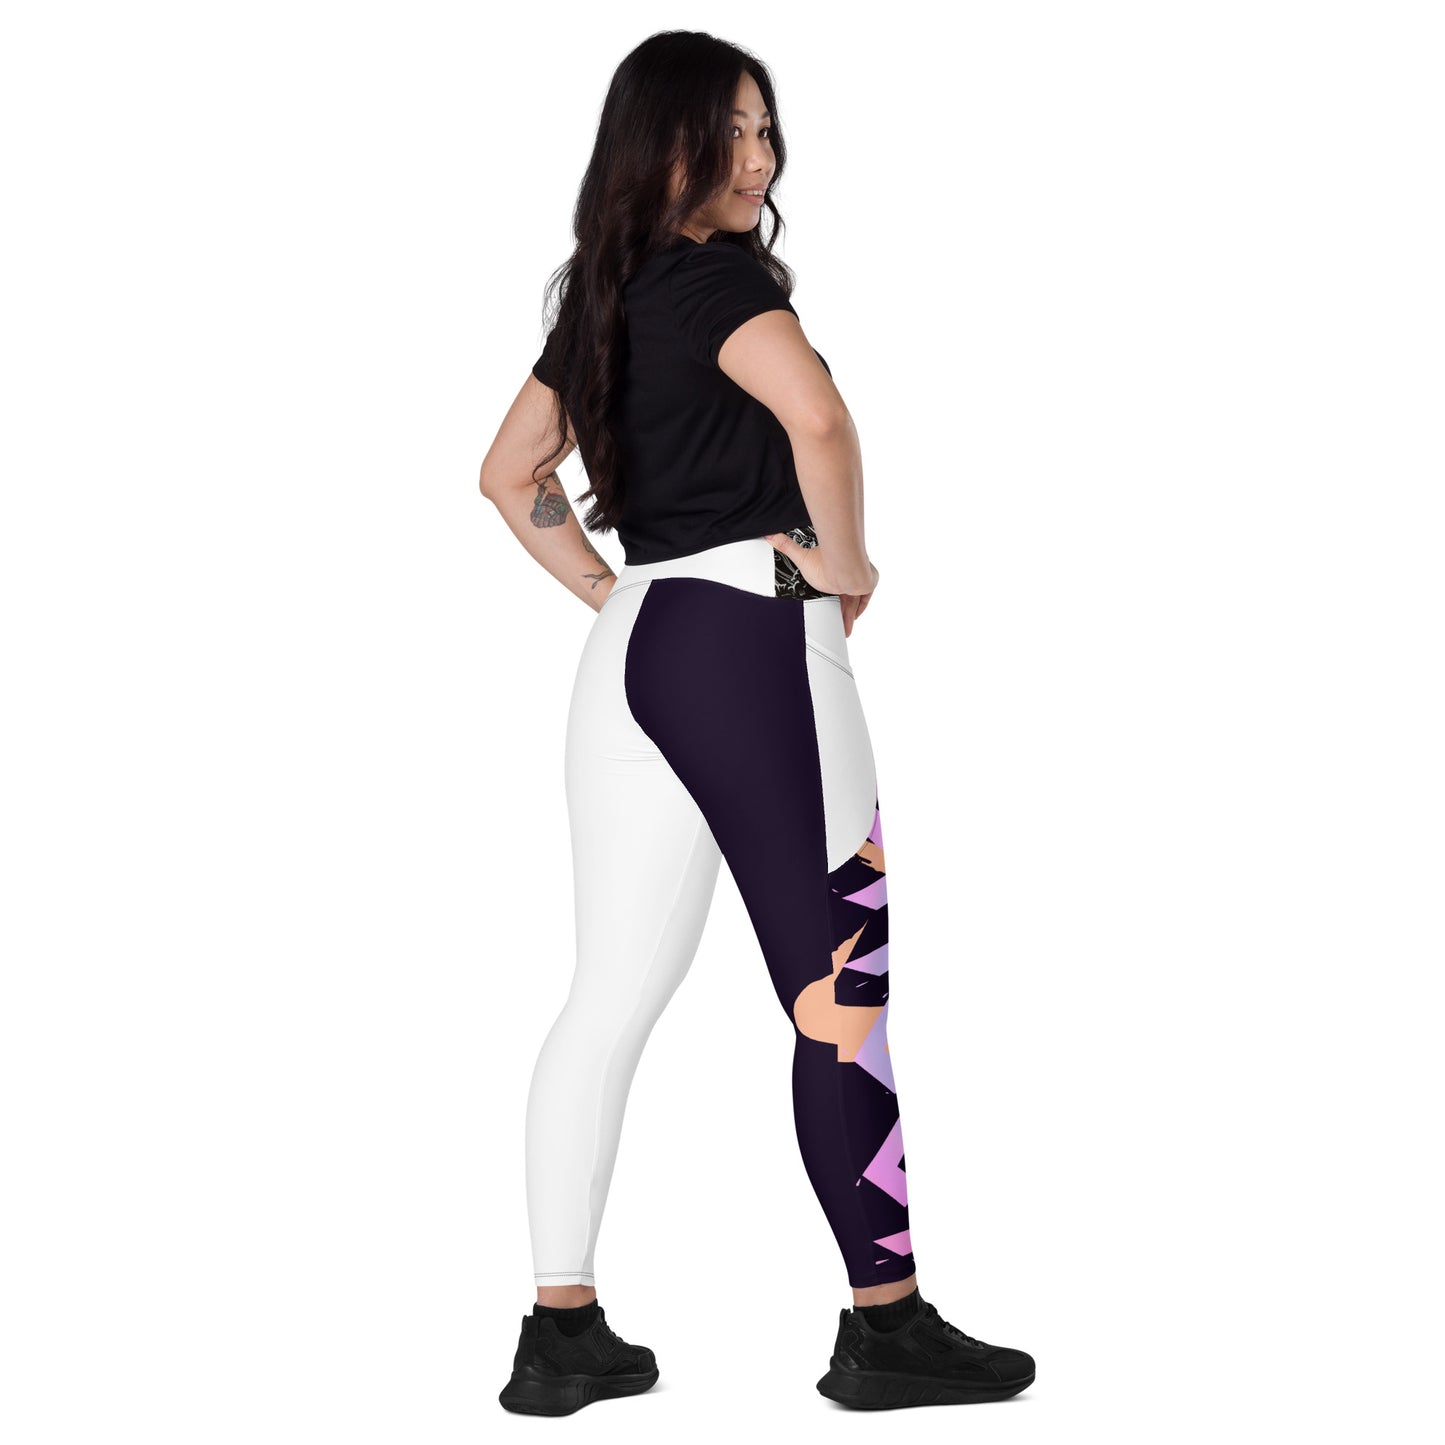 "KENSEI x X37" - Leggings with Pockets, We know. "We Got You!"